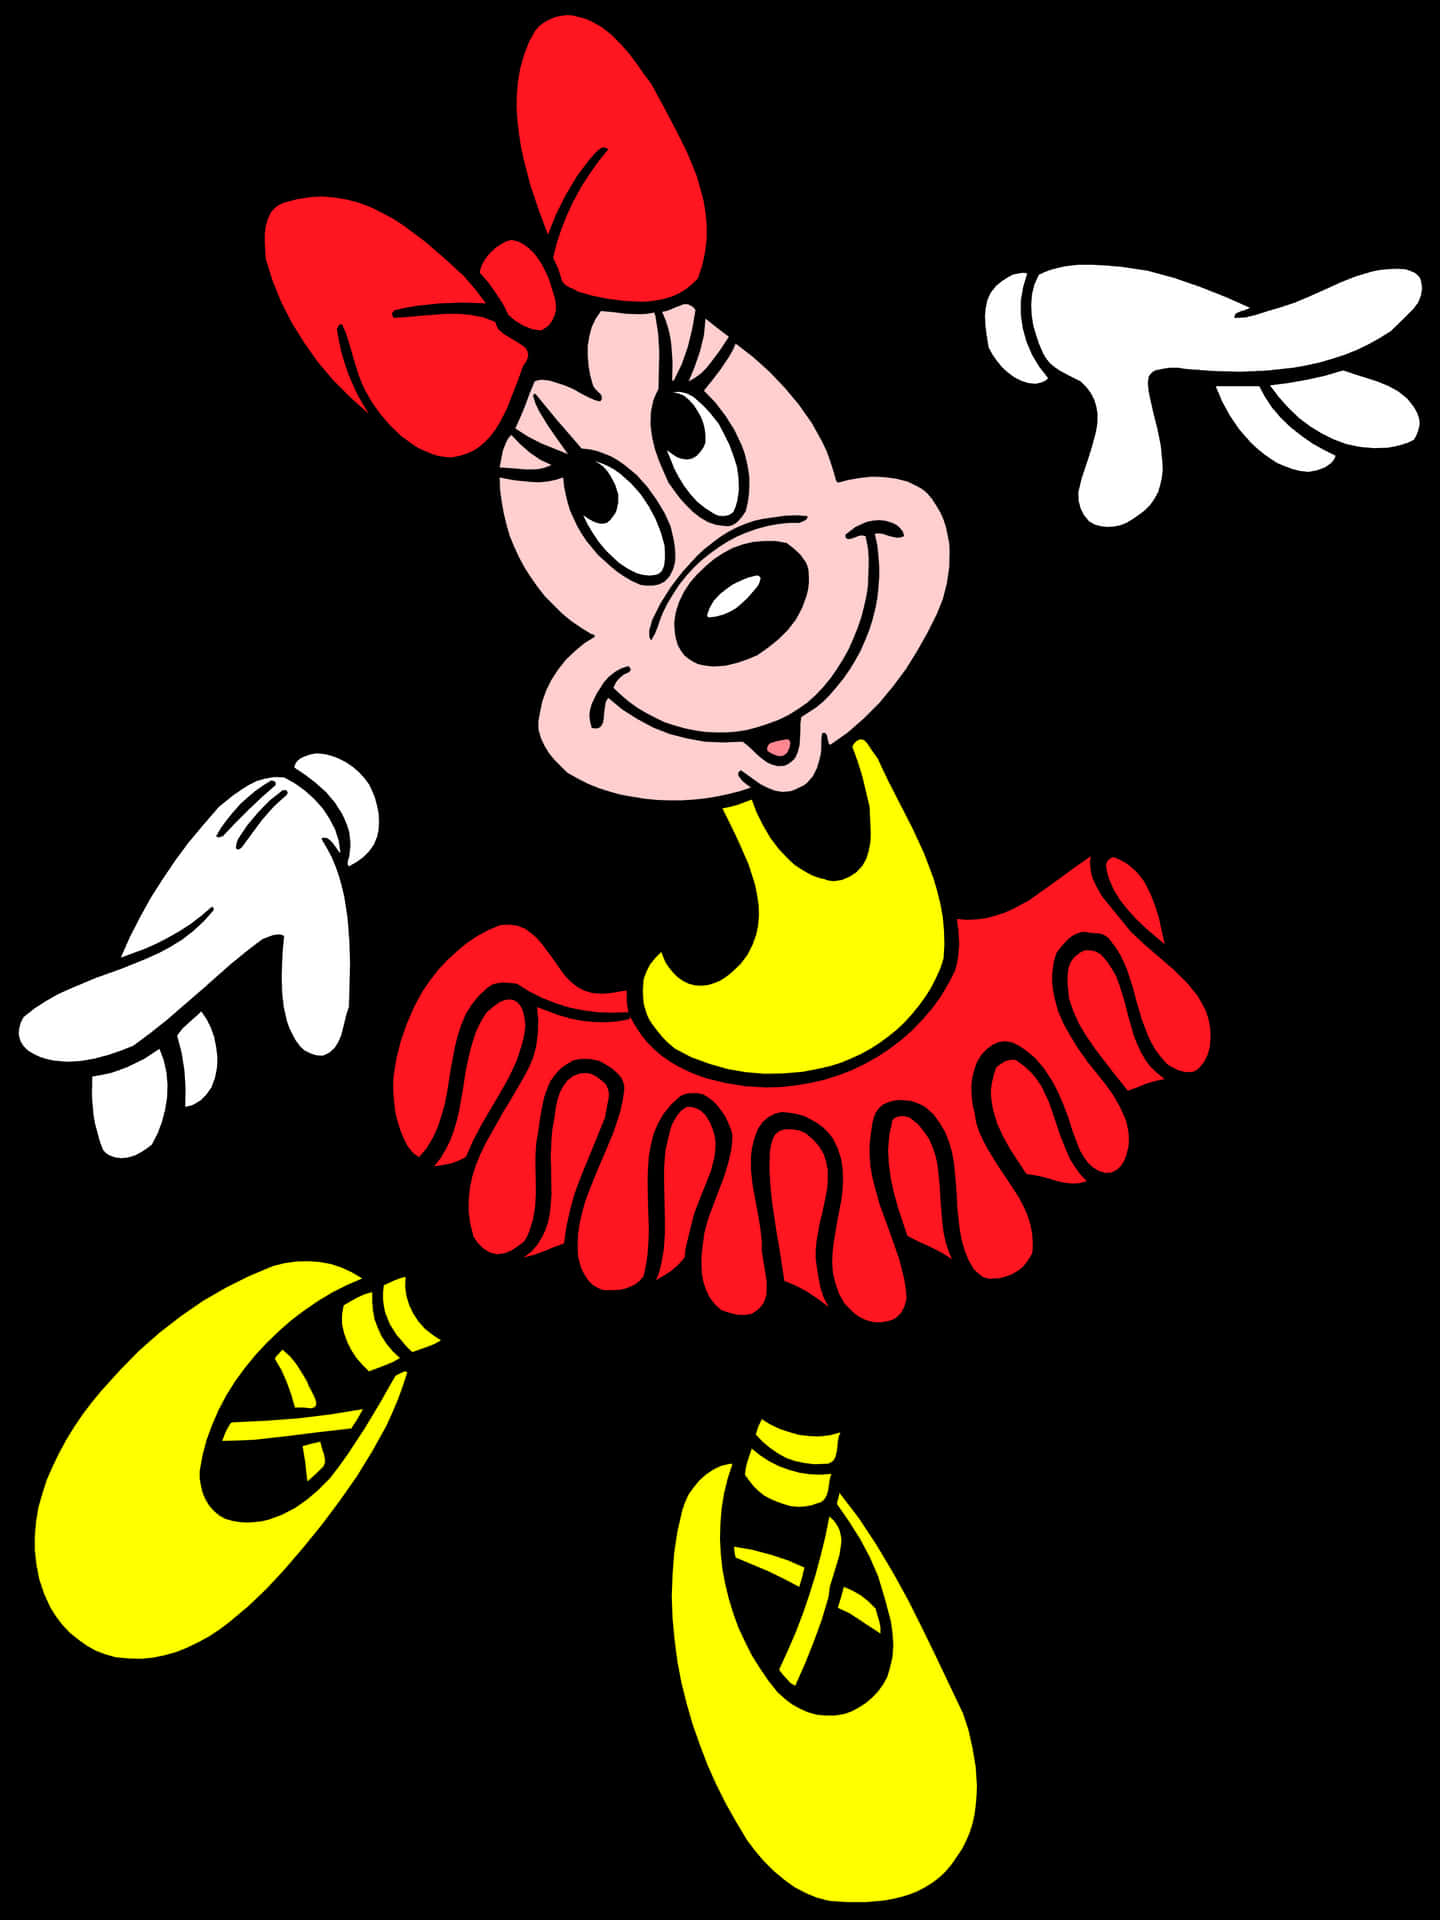 Classic Minnie Mouse Illustration PNG